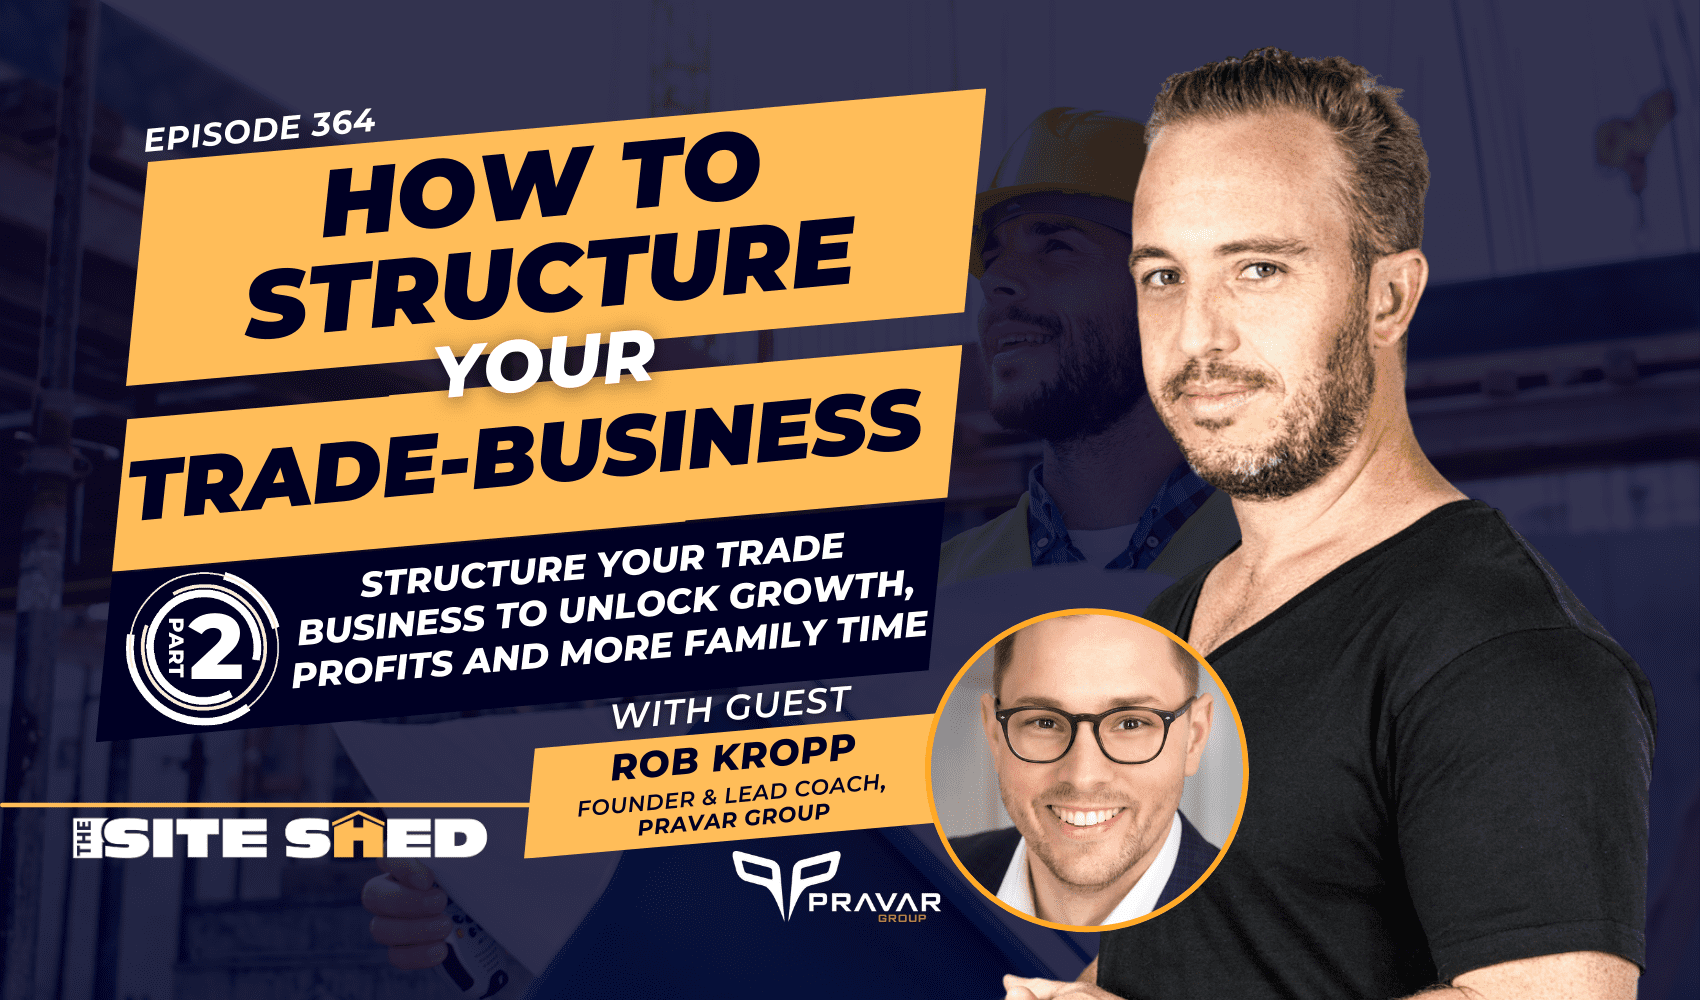 Structure Your Trade Business to Unlock Growth, Profits and More